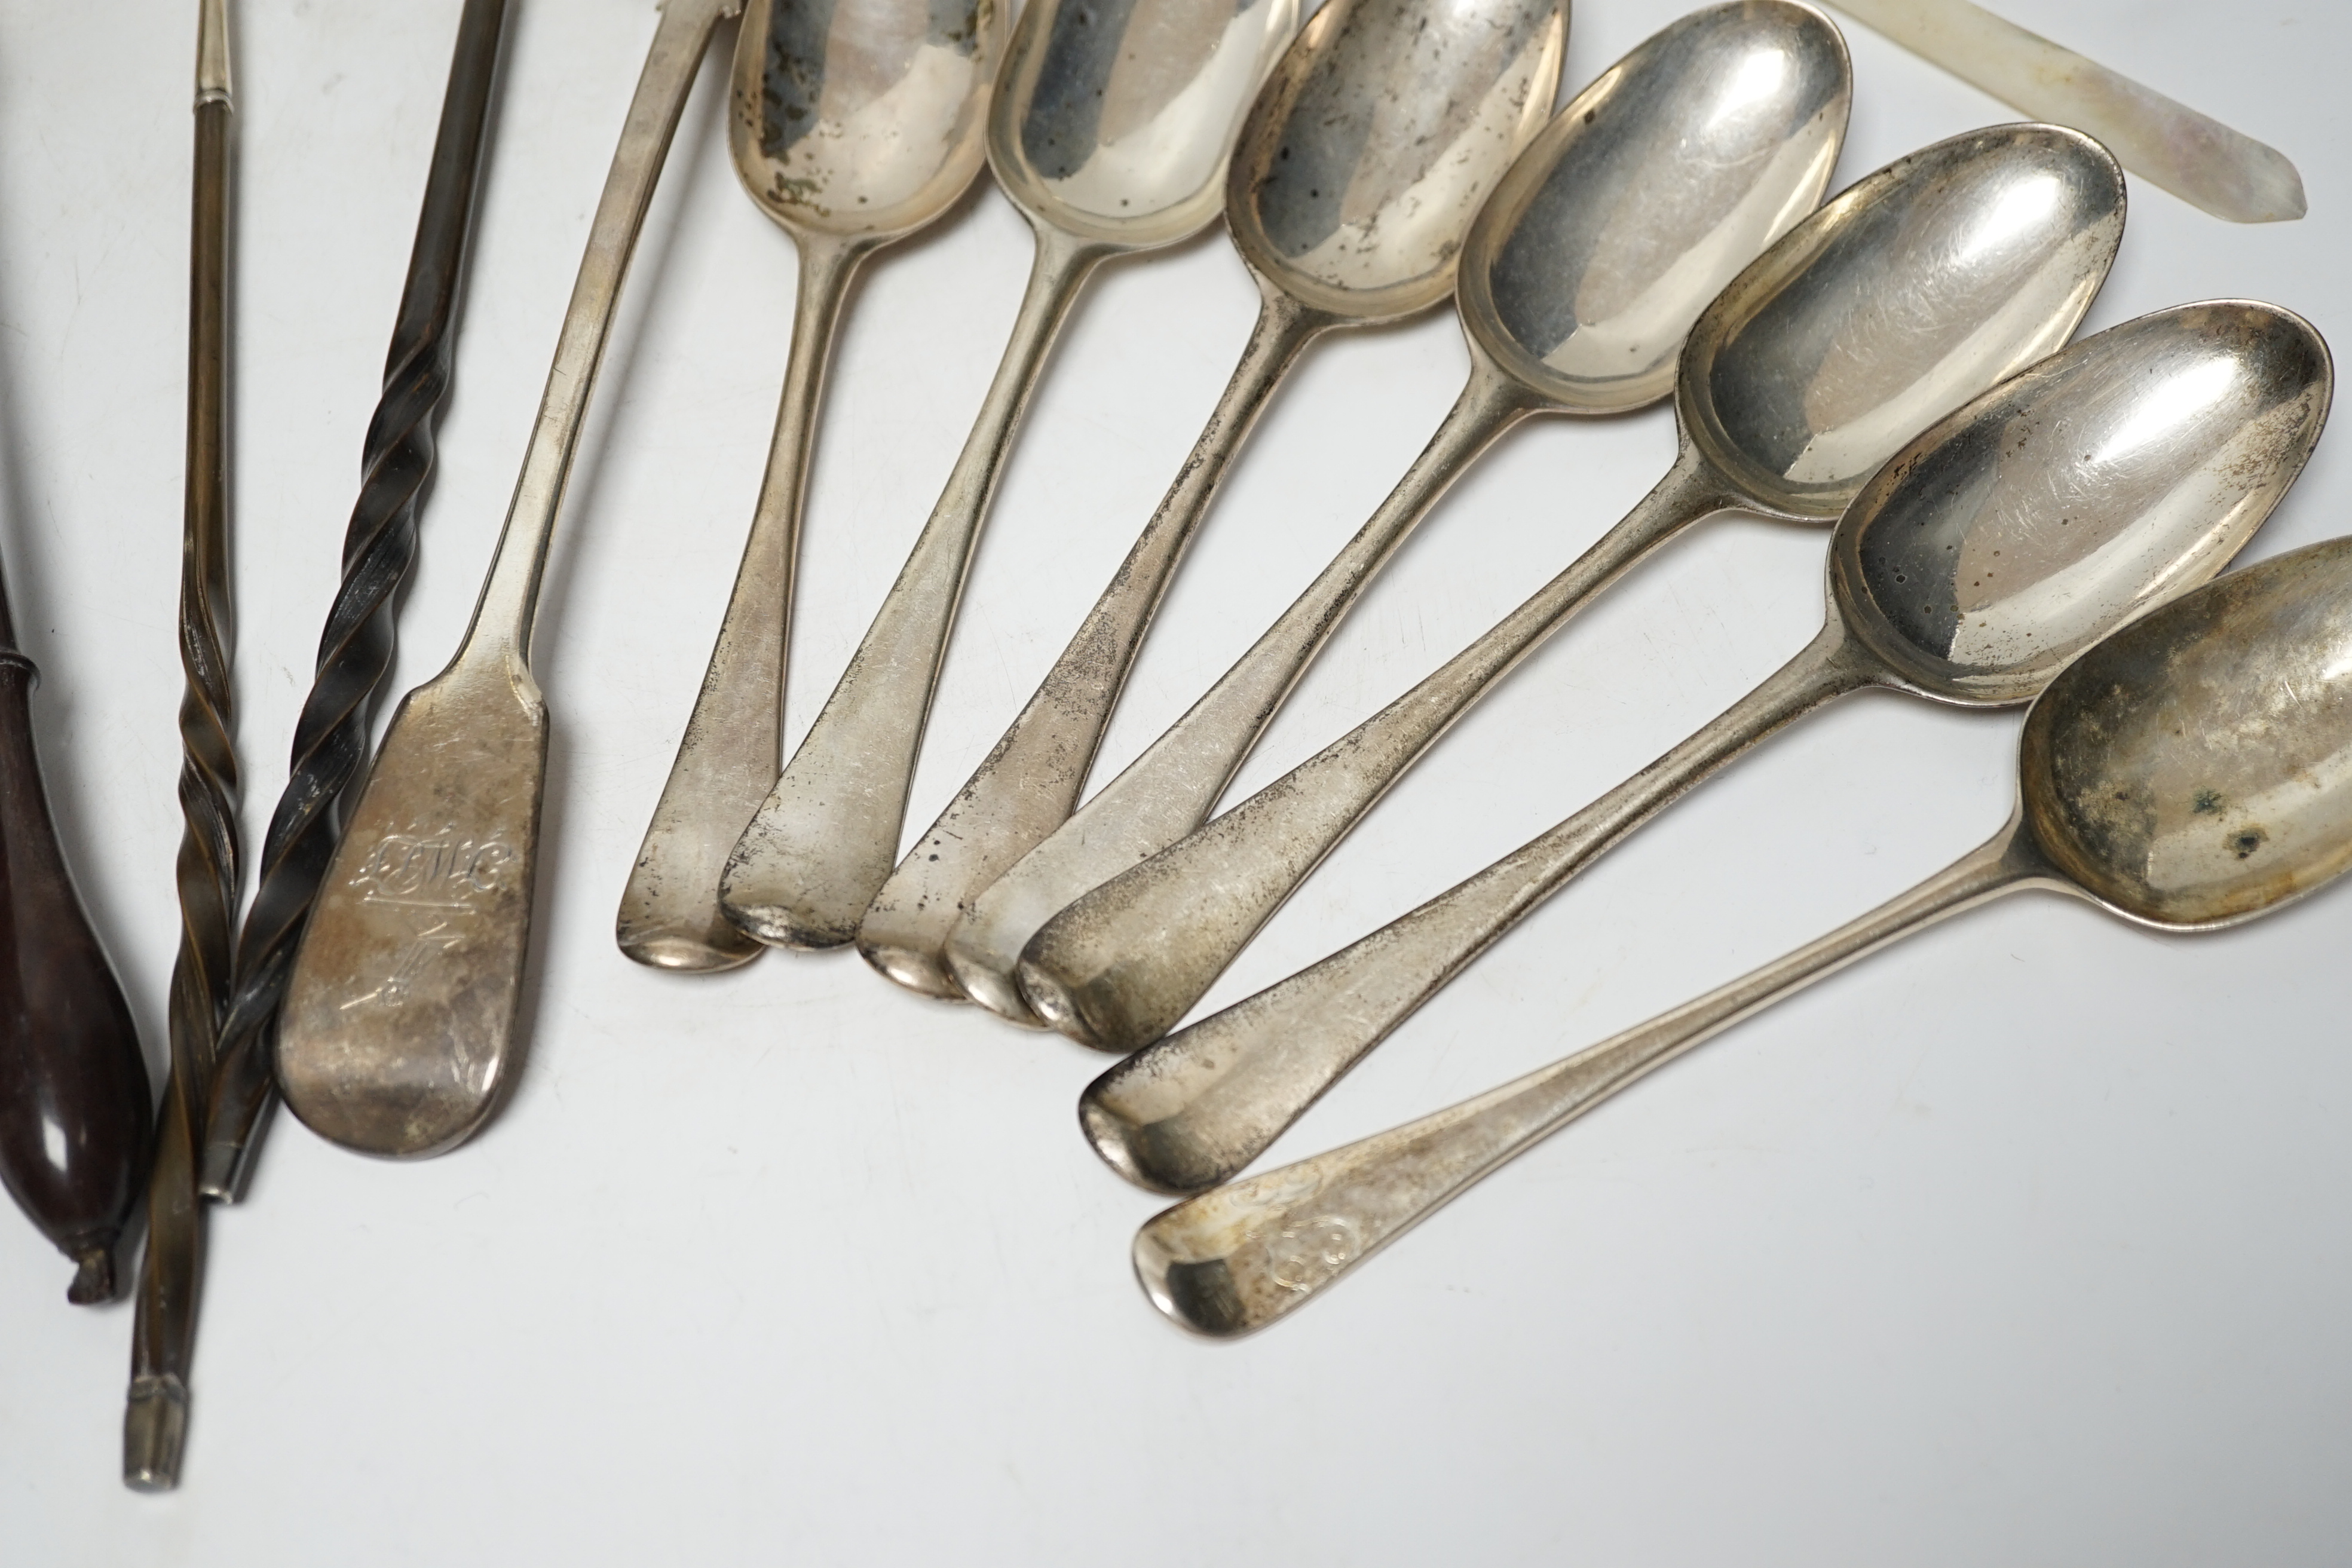 A late William IV silver fiddle pattern basting spoon, London, 1836, seven assorted 19th century silver base mark spoons, a Georgian Scottish dessert spoon, two toddy ladles, A George II brandy ladle, London, 1735, a Geo